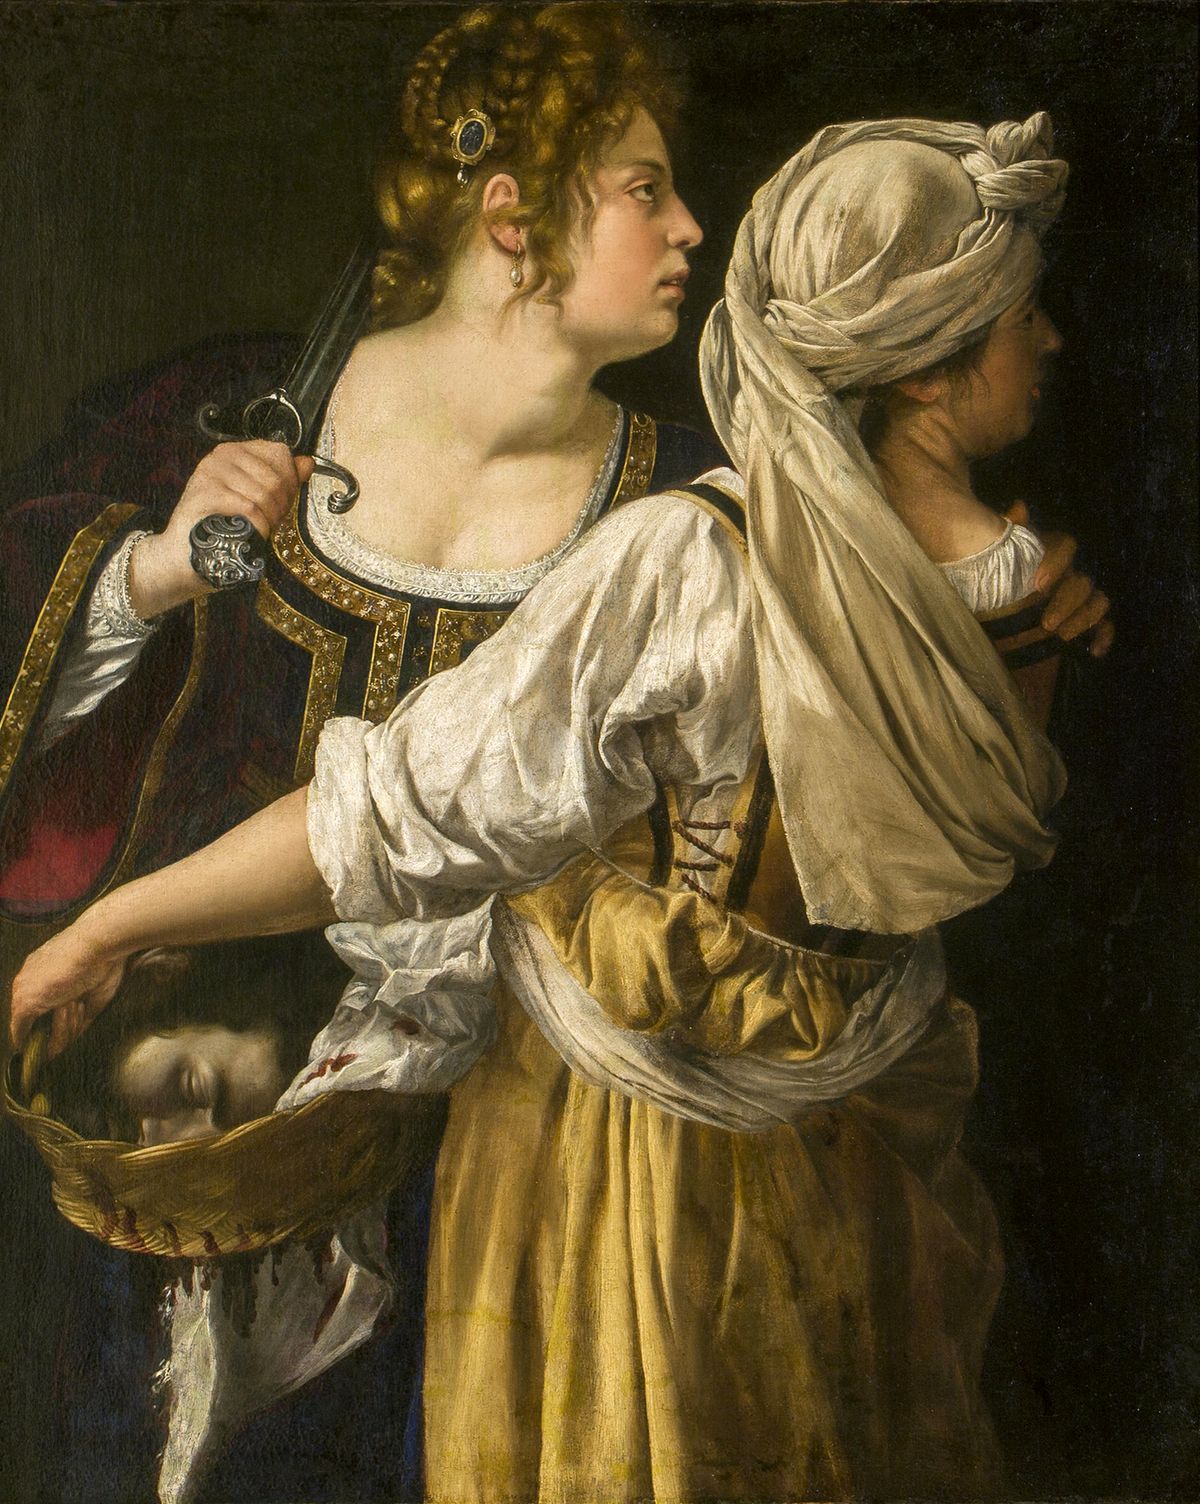 Judith and her Maidservant by Artemisia Gentileschi (1613-1614) - Public Domain Bible Painting